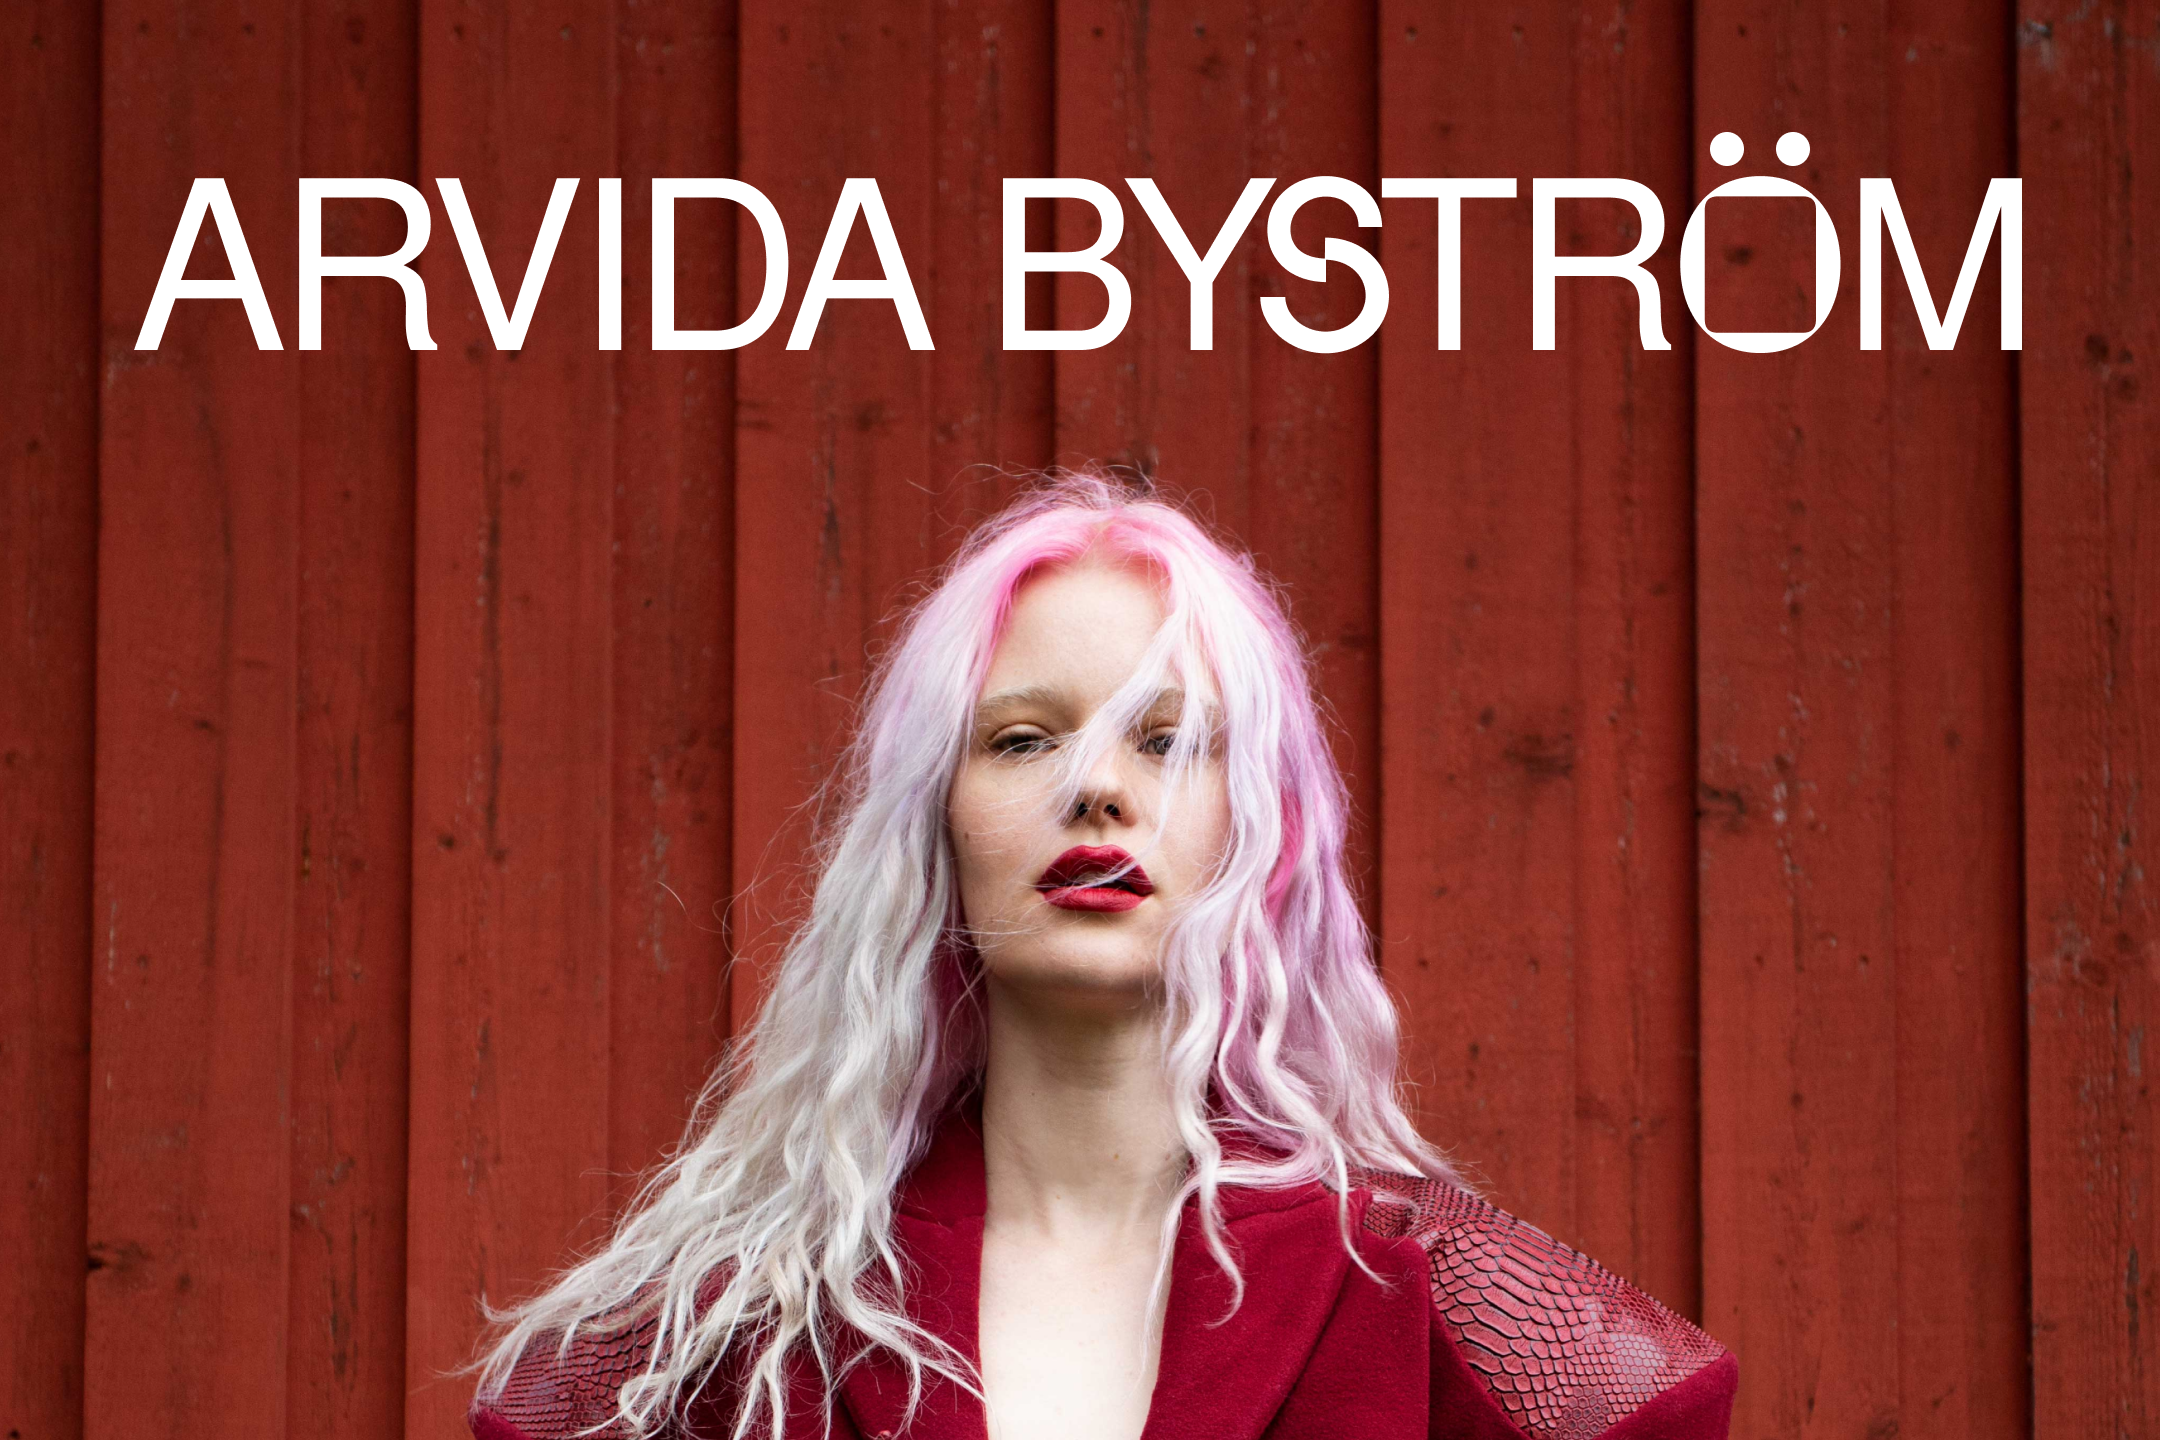 Arvida Byström on the myths we make to cope with reality. | Foundation